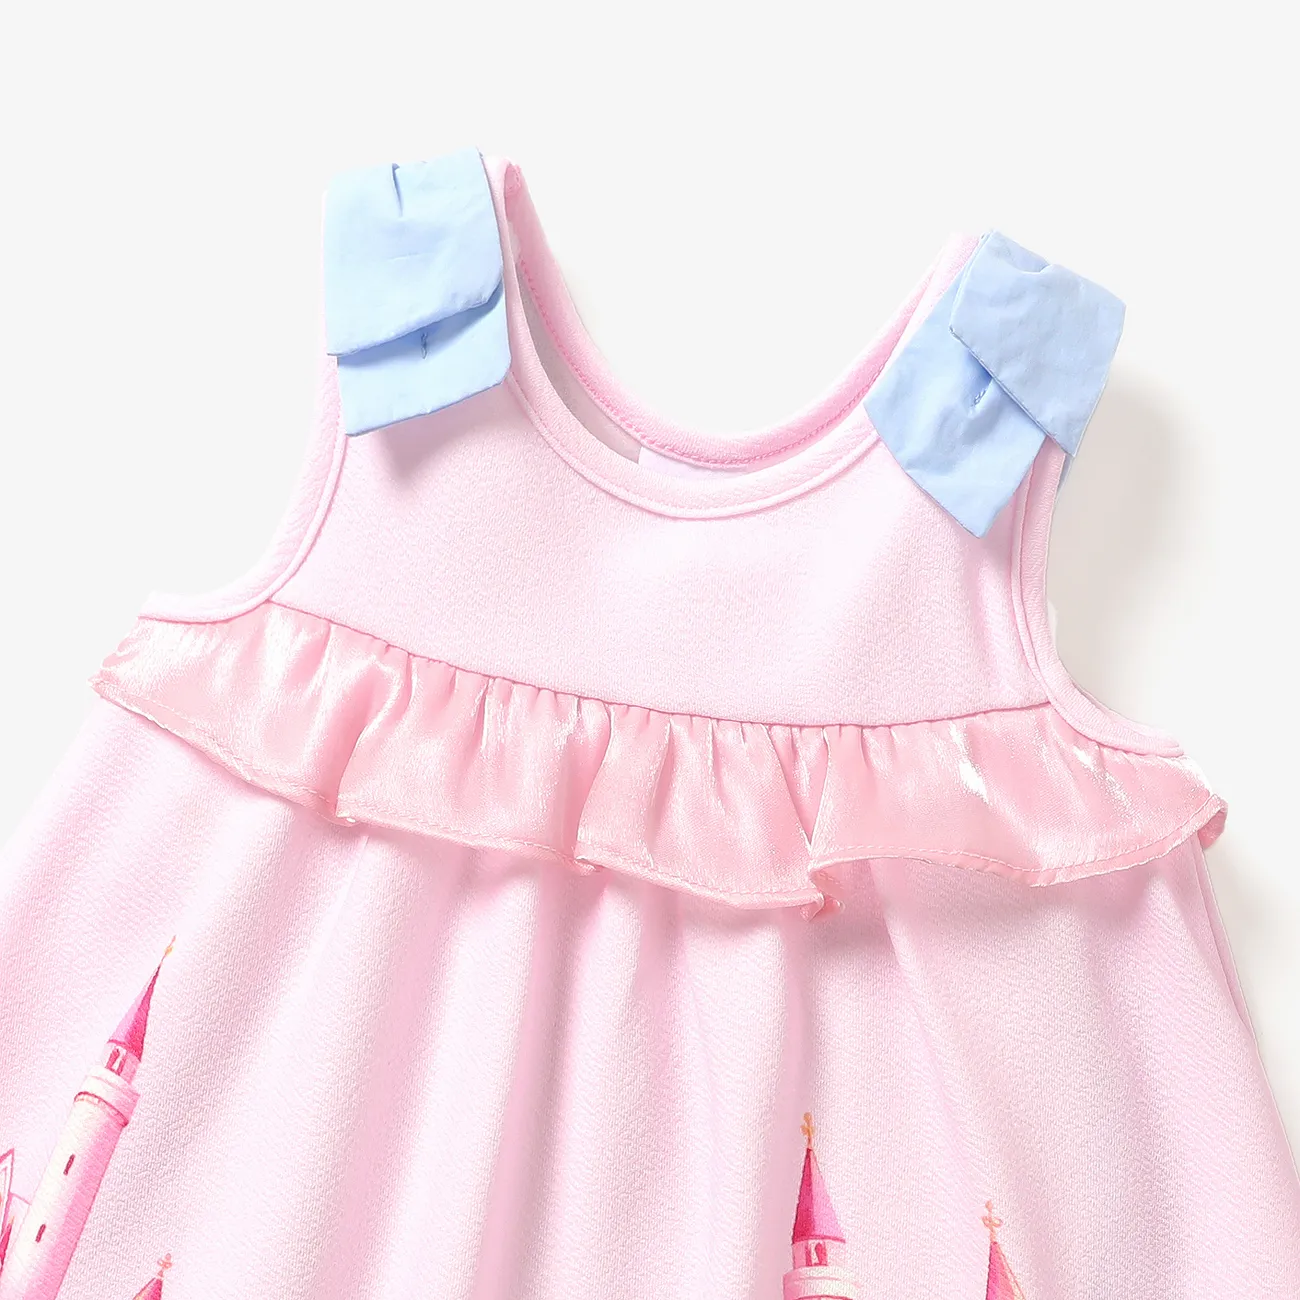 Baby Girl Elegant Floral Dress with Ruffle Edge Pink big image 1